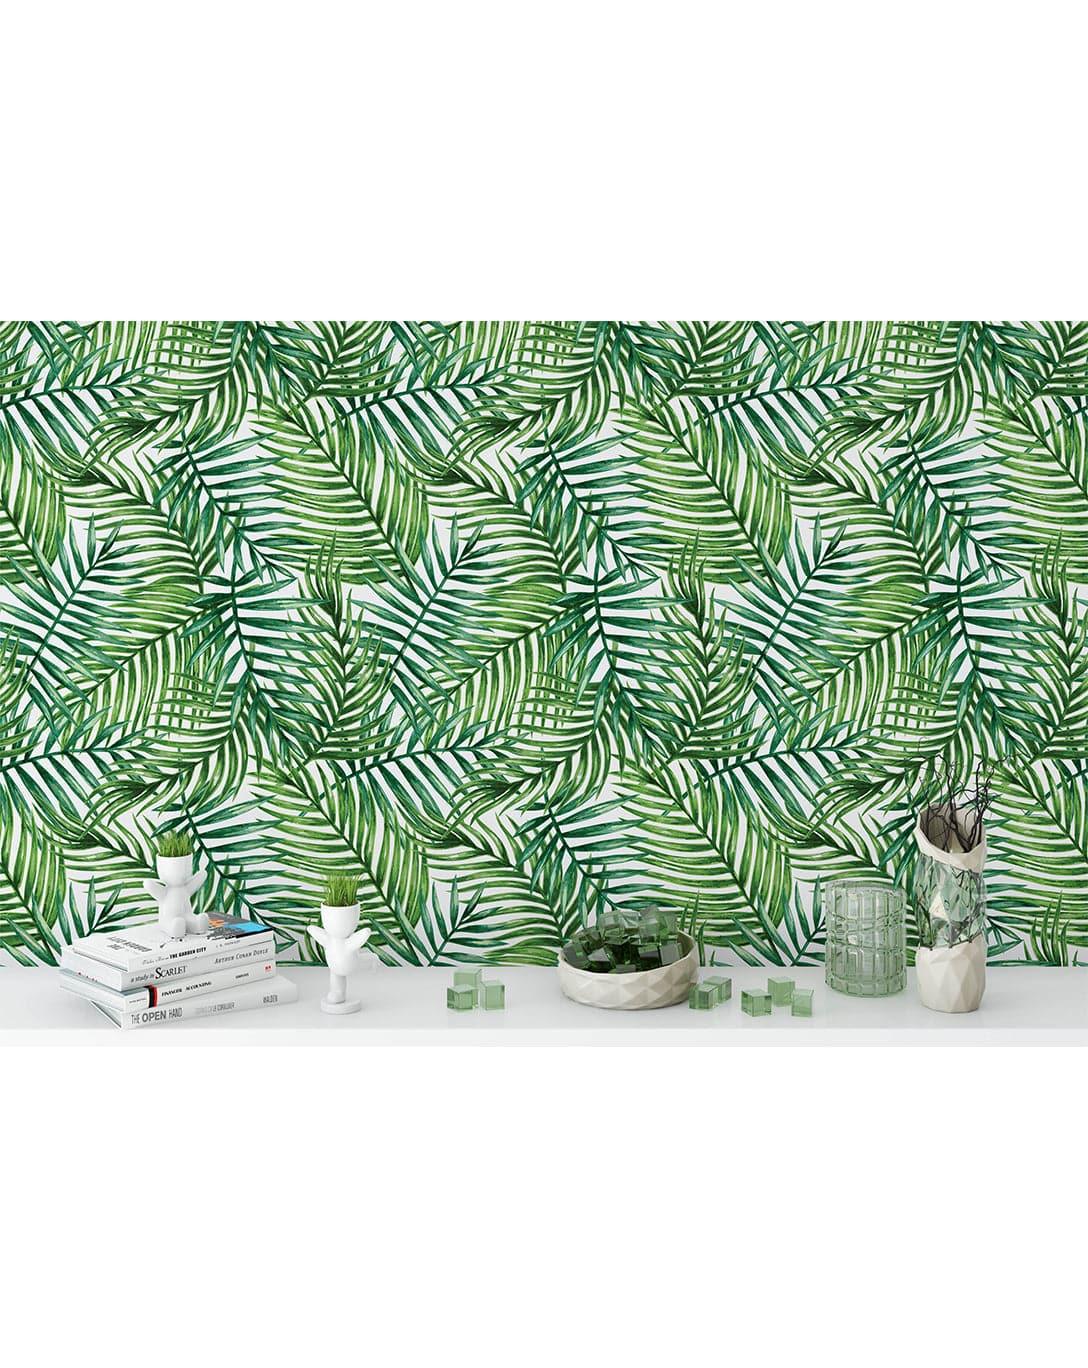 Watercolor Tropical Green Palm Leaves Removable Wallpaper Watercolor Tropical Green Palm Leaves Removable Wallpaper Watercolor Tropical Green Palm Leaves Removable Wallpaper 